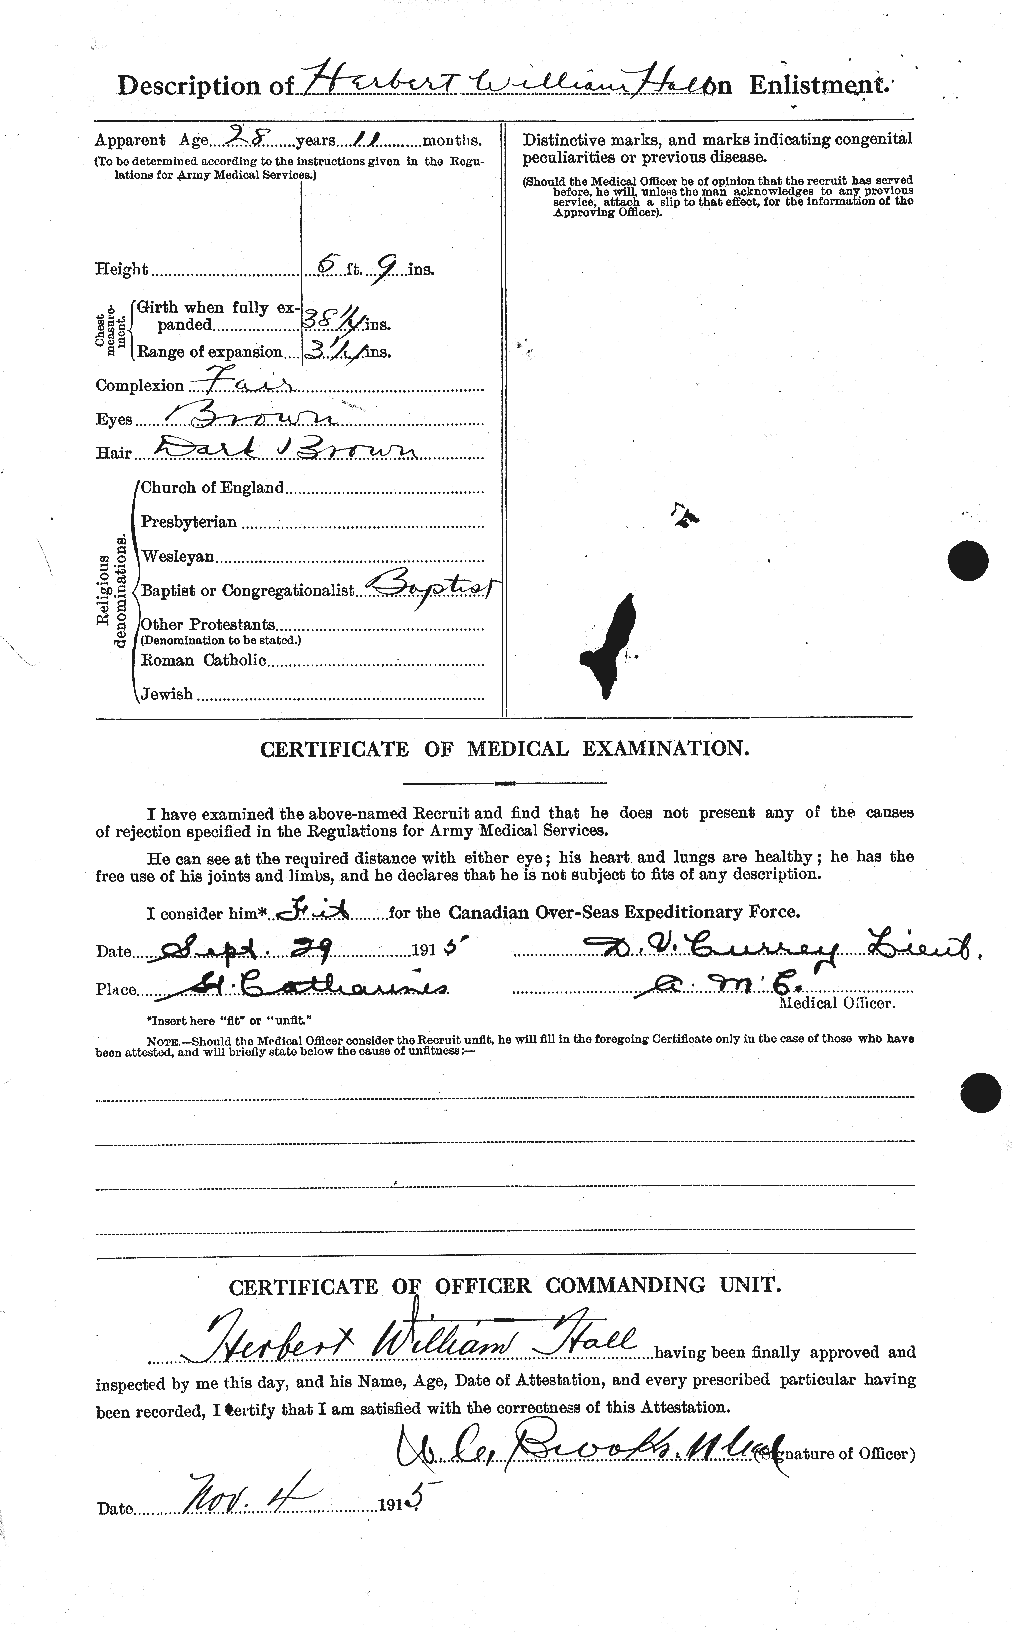 Personnel Records of the First World War - CEF 374149b